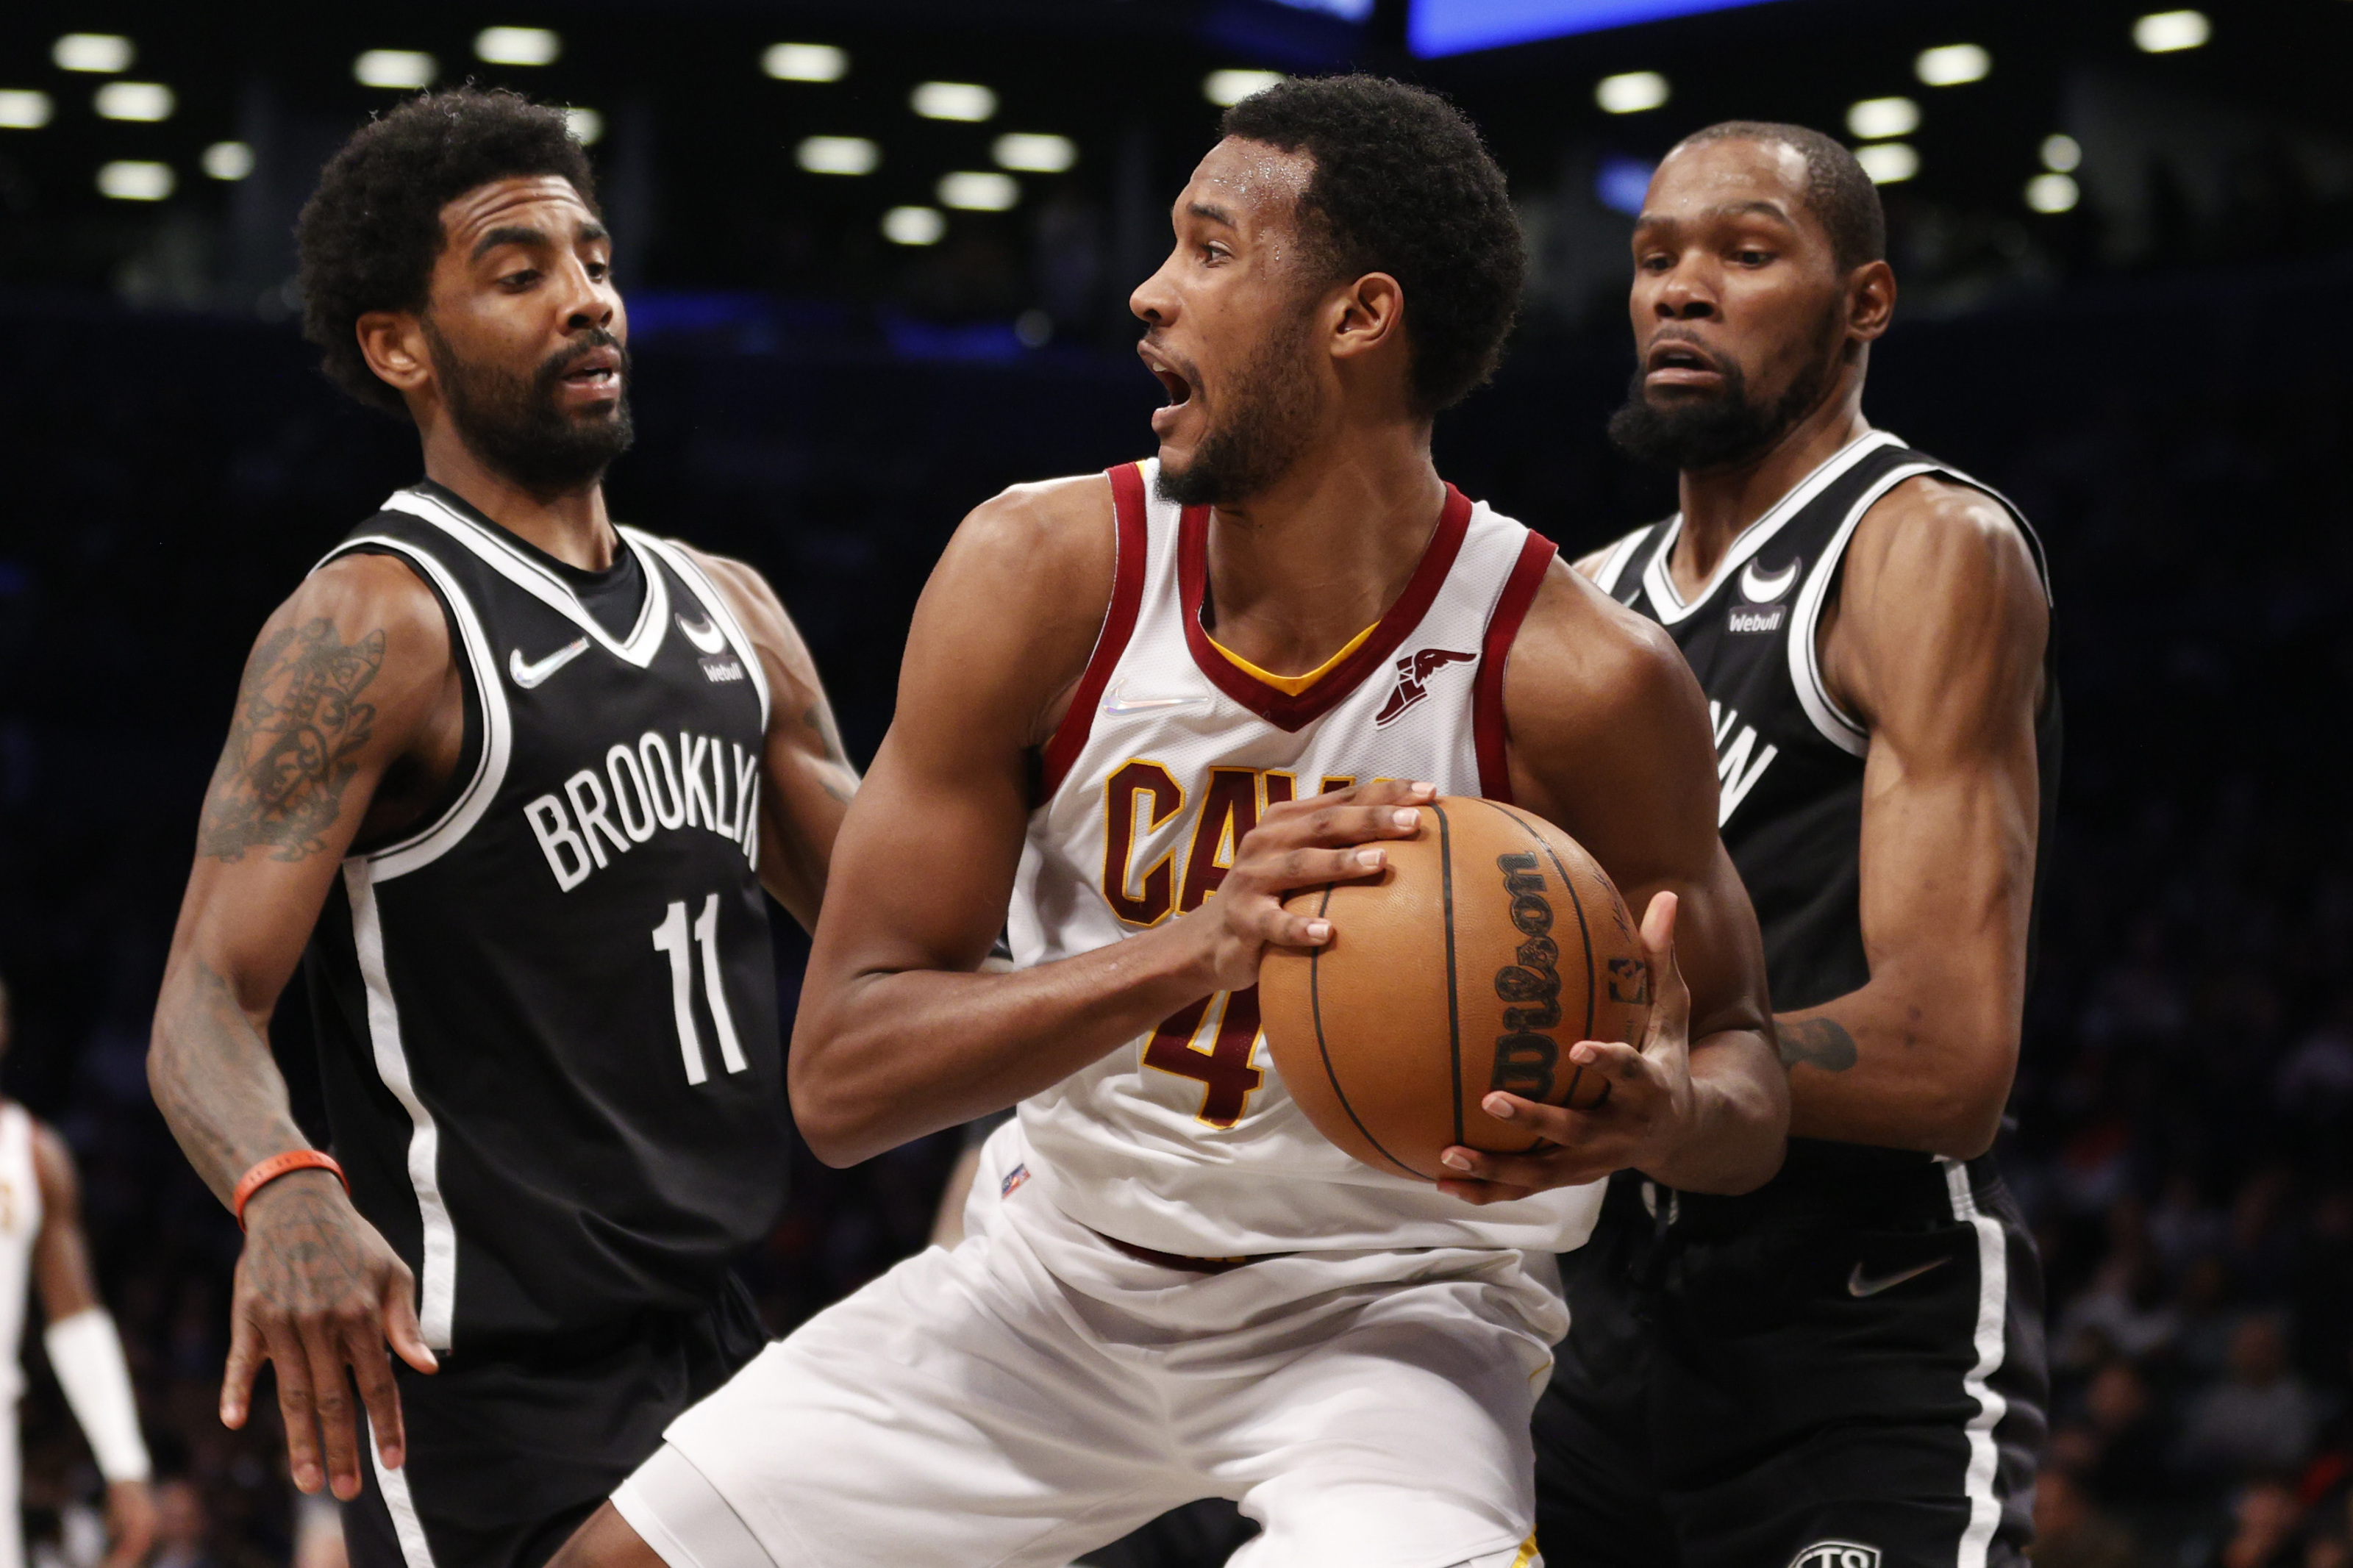 Cleveland Cavaliers Game Tonight Cavs vs Nets Odds, Starting Lineup, Injury Report, Predictions, TV channel for Dec 26